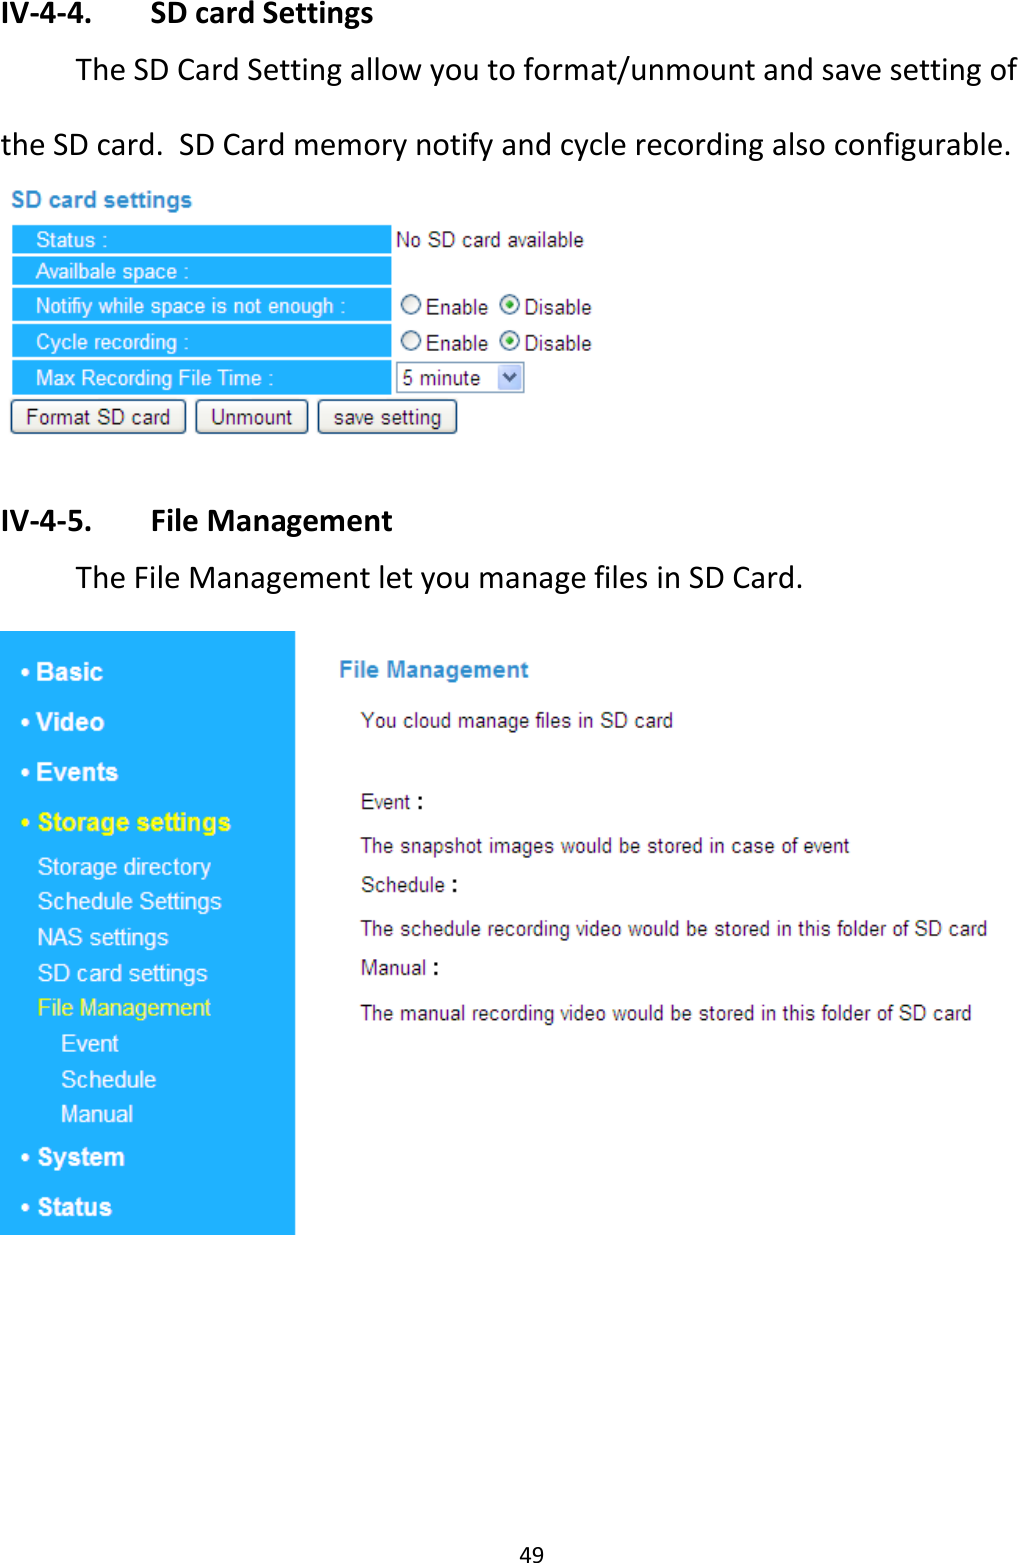 49  IV-4-4.   SD card Settings  The SD Card Setting allow you to format/unmount and save setting of the SD card.  SD Card memory notify and cycle recording also configurable.   IV-4-5.   File Management  The File Management let you manage files in SD Card.  